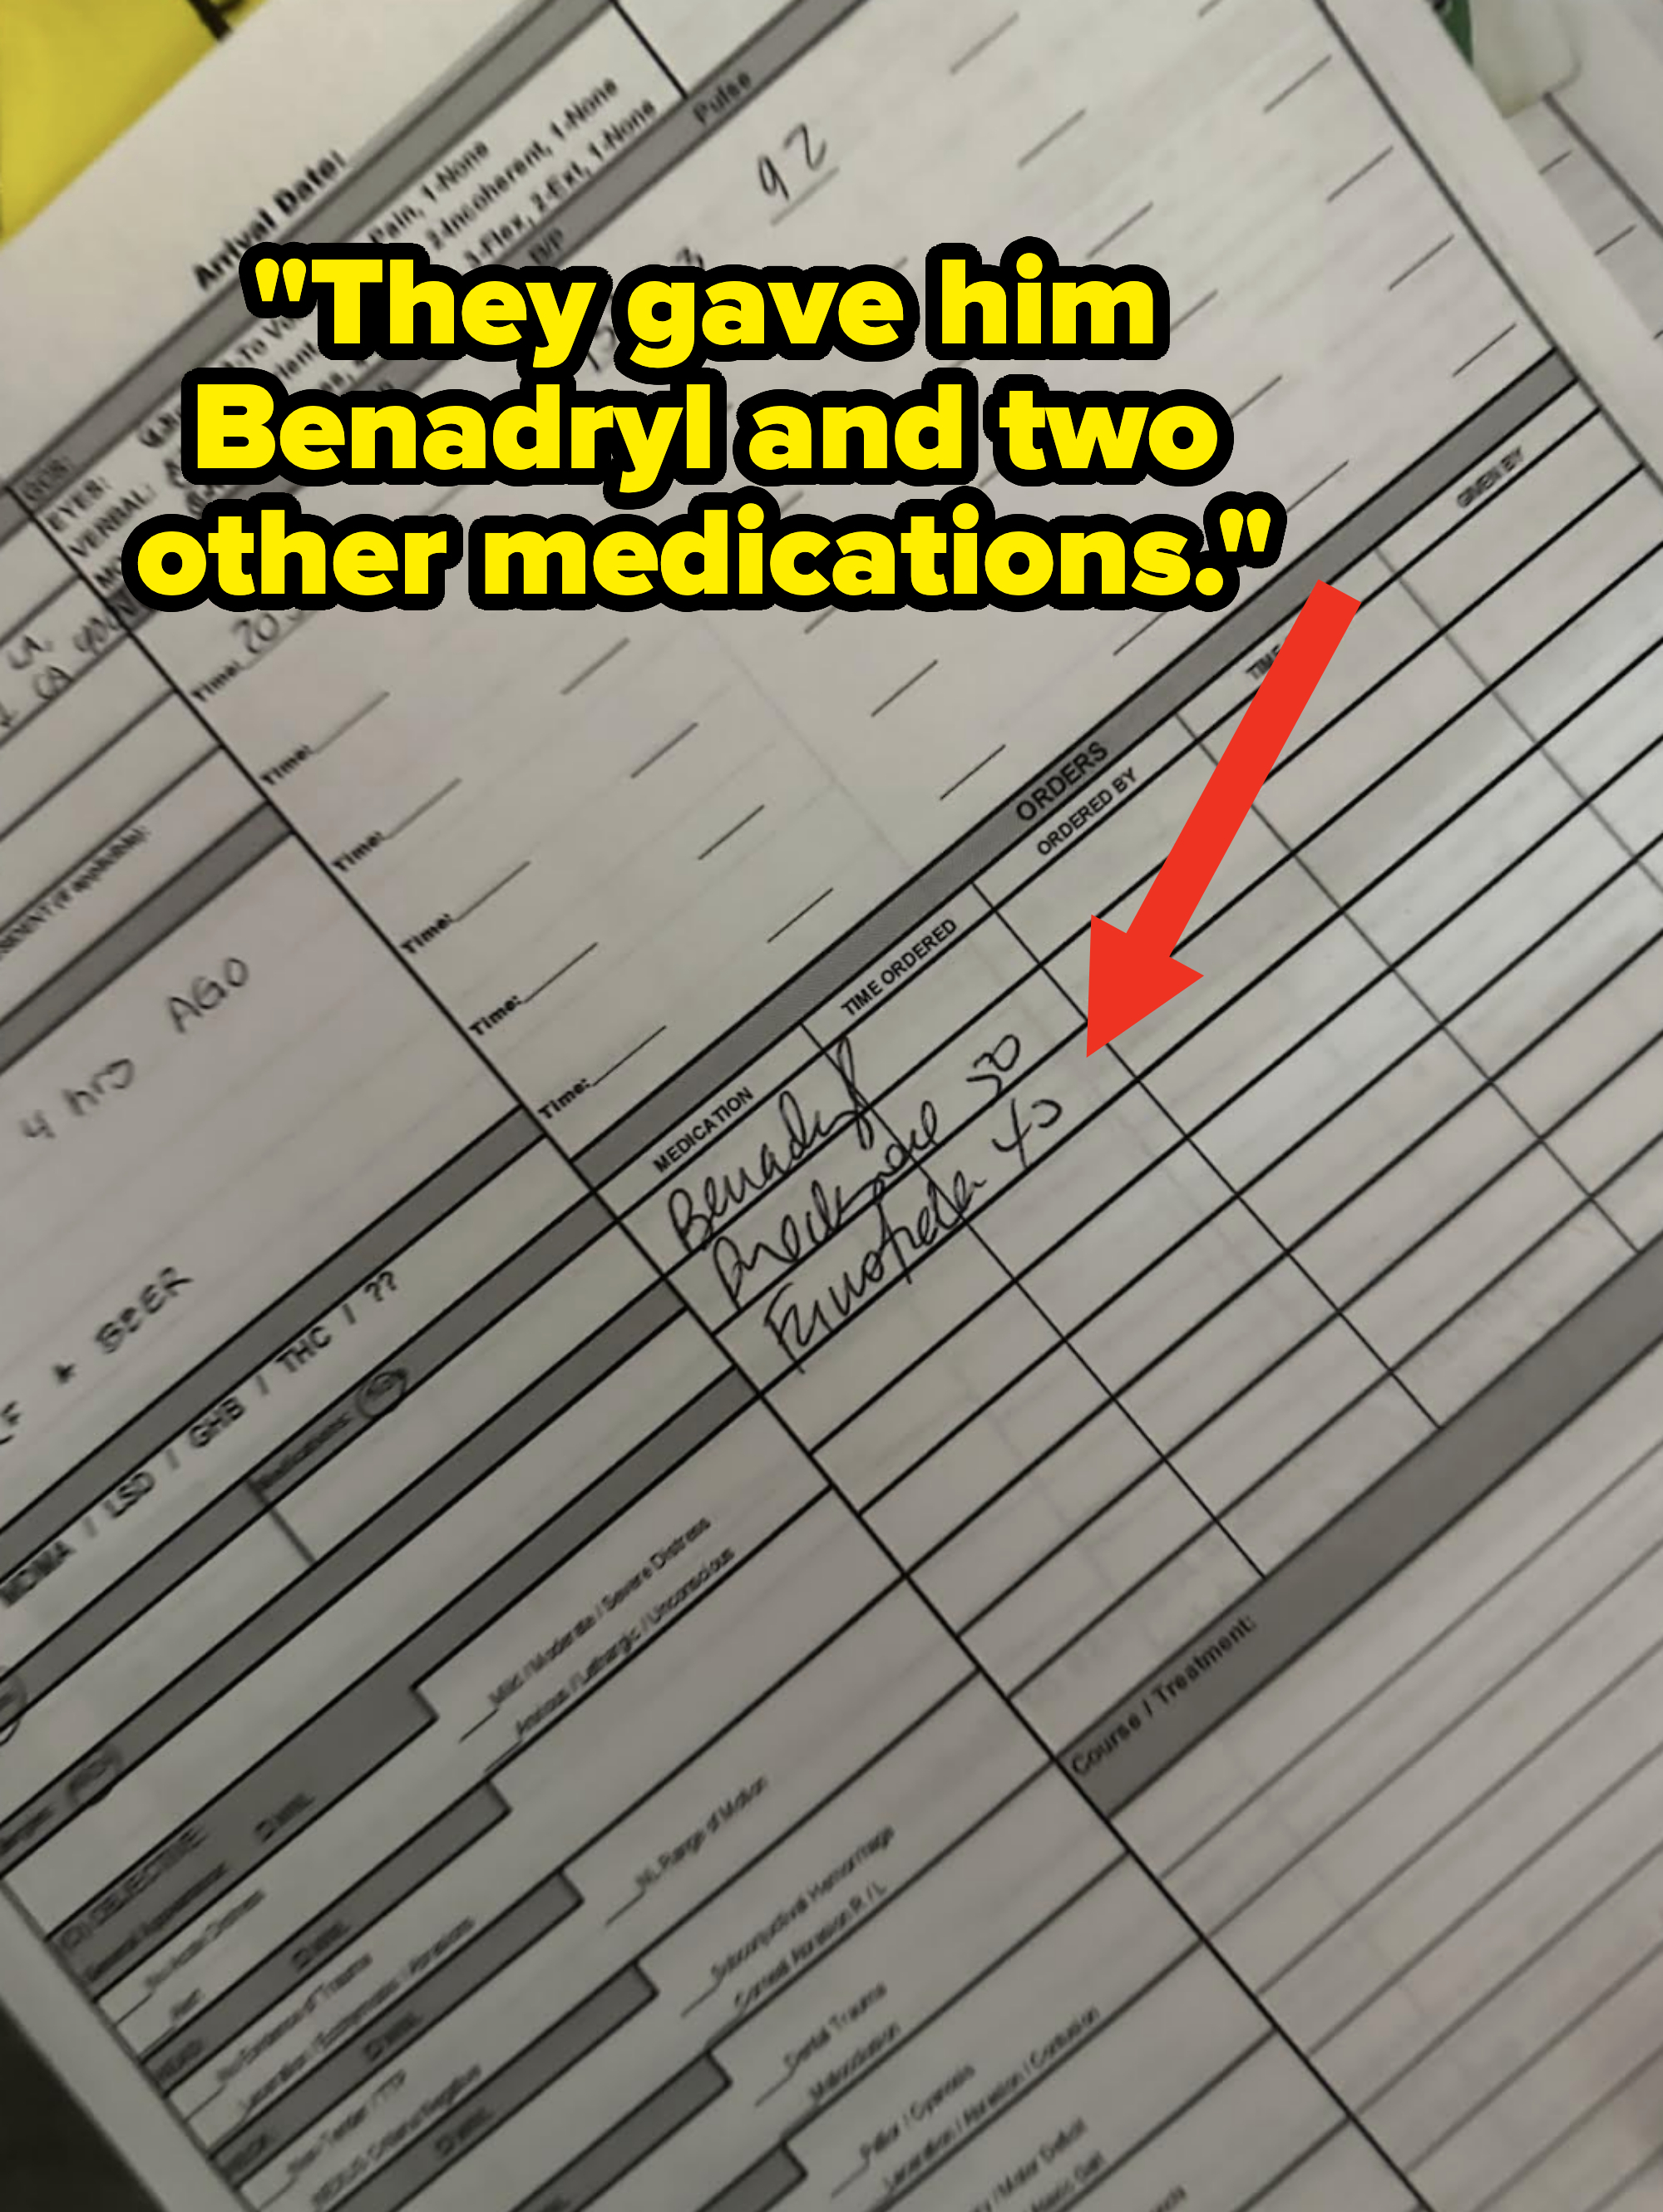 medical form with three medications written down including Benadryl